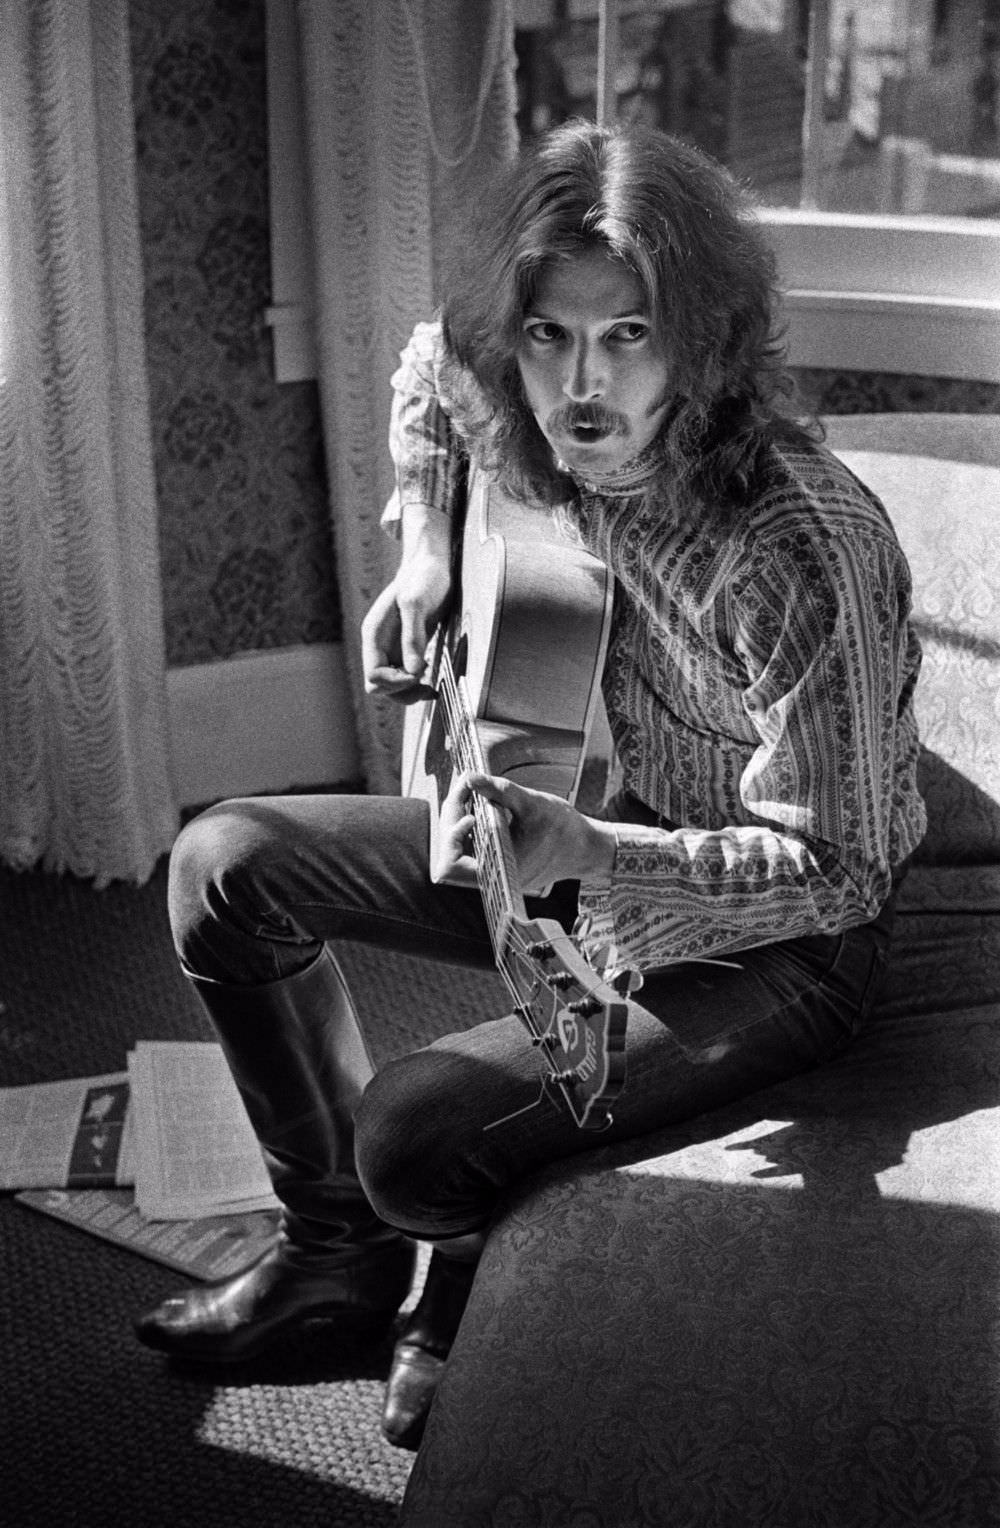 Eric Clapton playing guitar in Jim Marshall’s apartment on Union Street, August 1967.